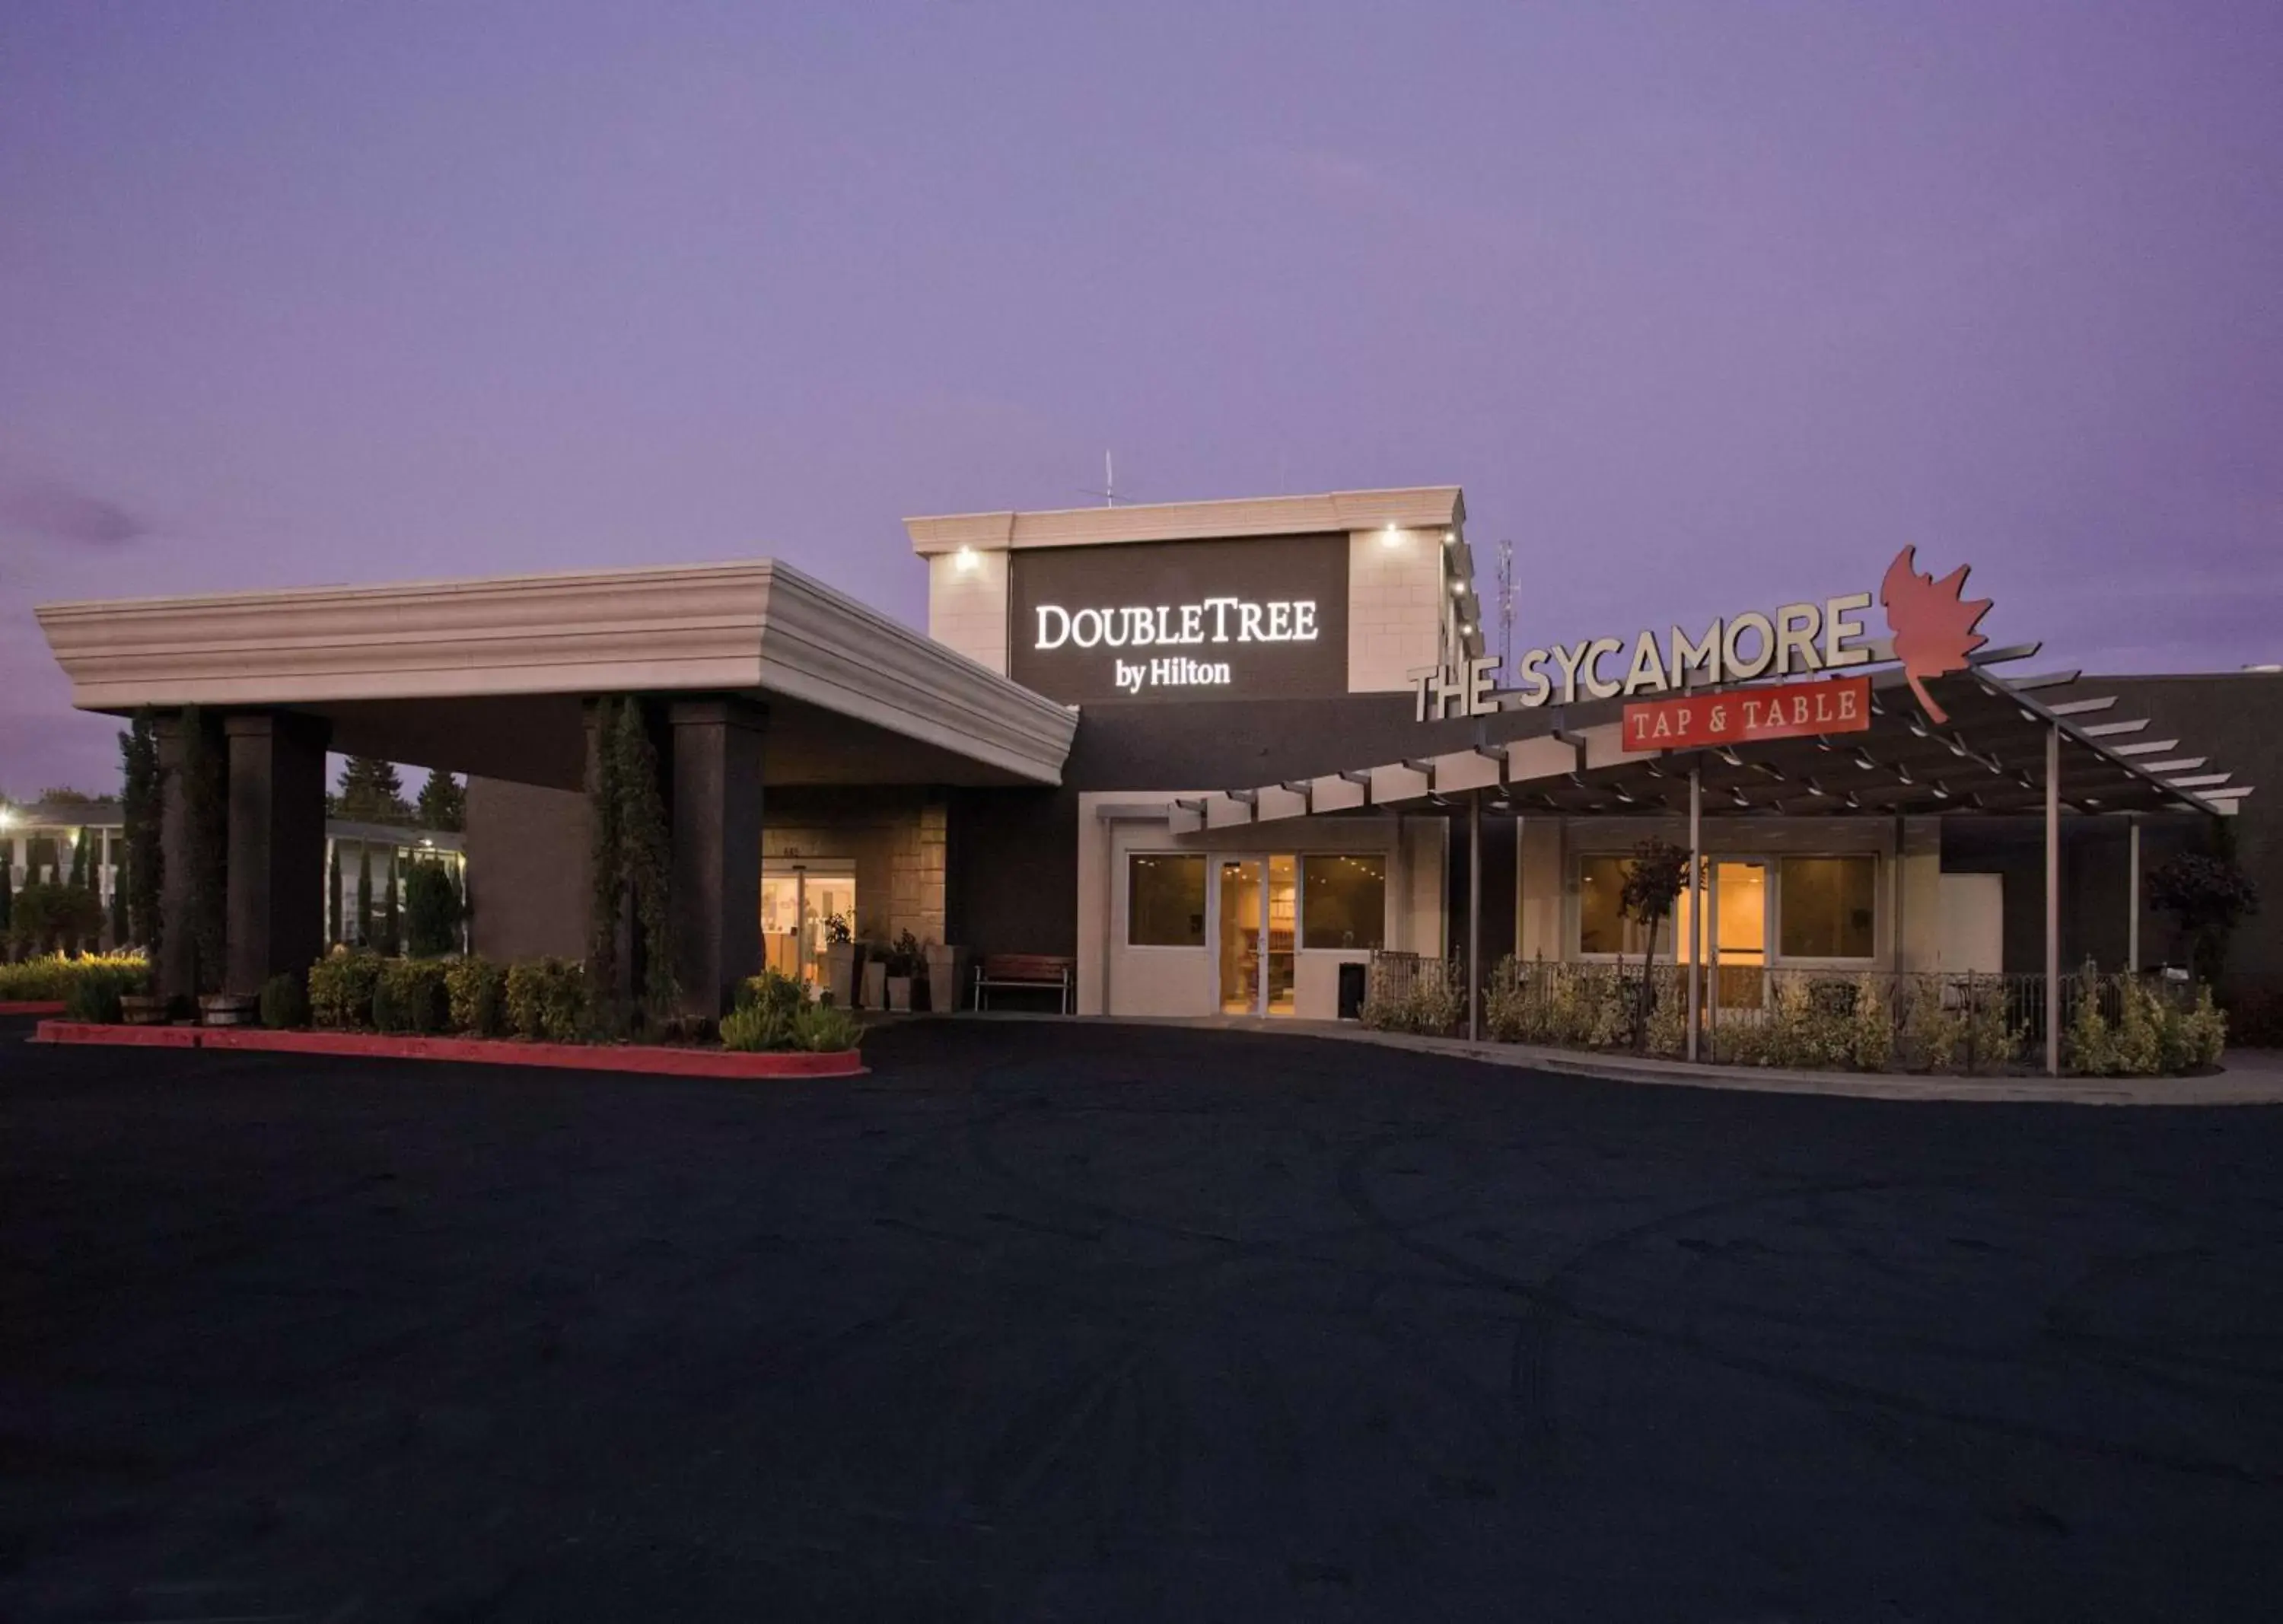 Property Building in Doubletree By Hilton Chico, Ca